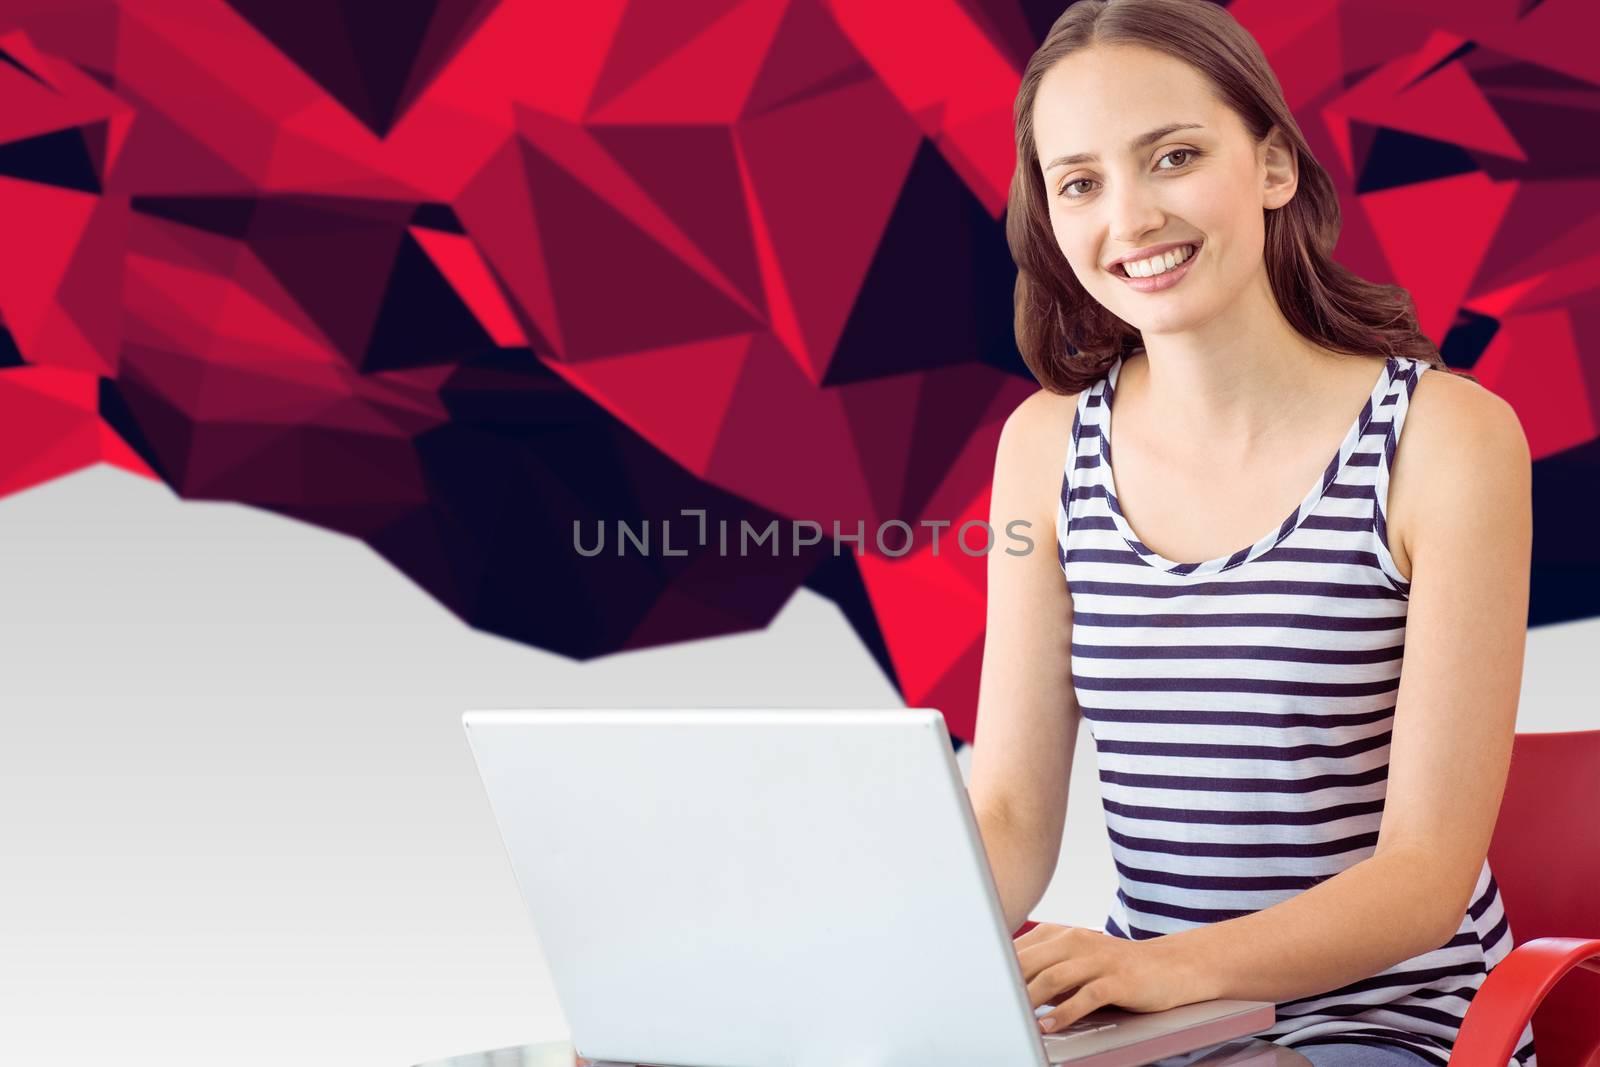 Student on laptop against red abstract design